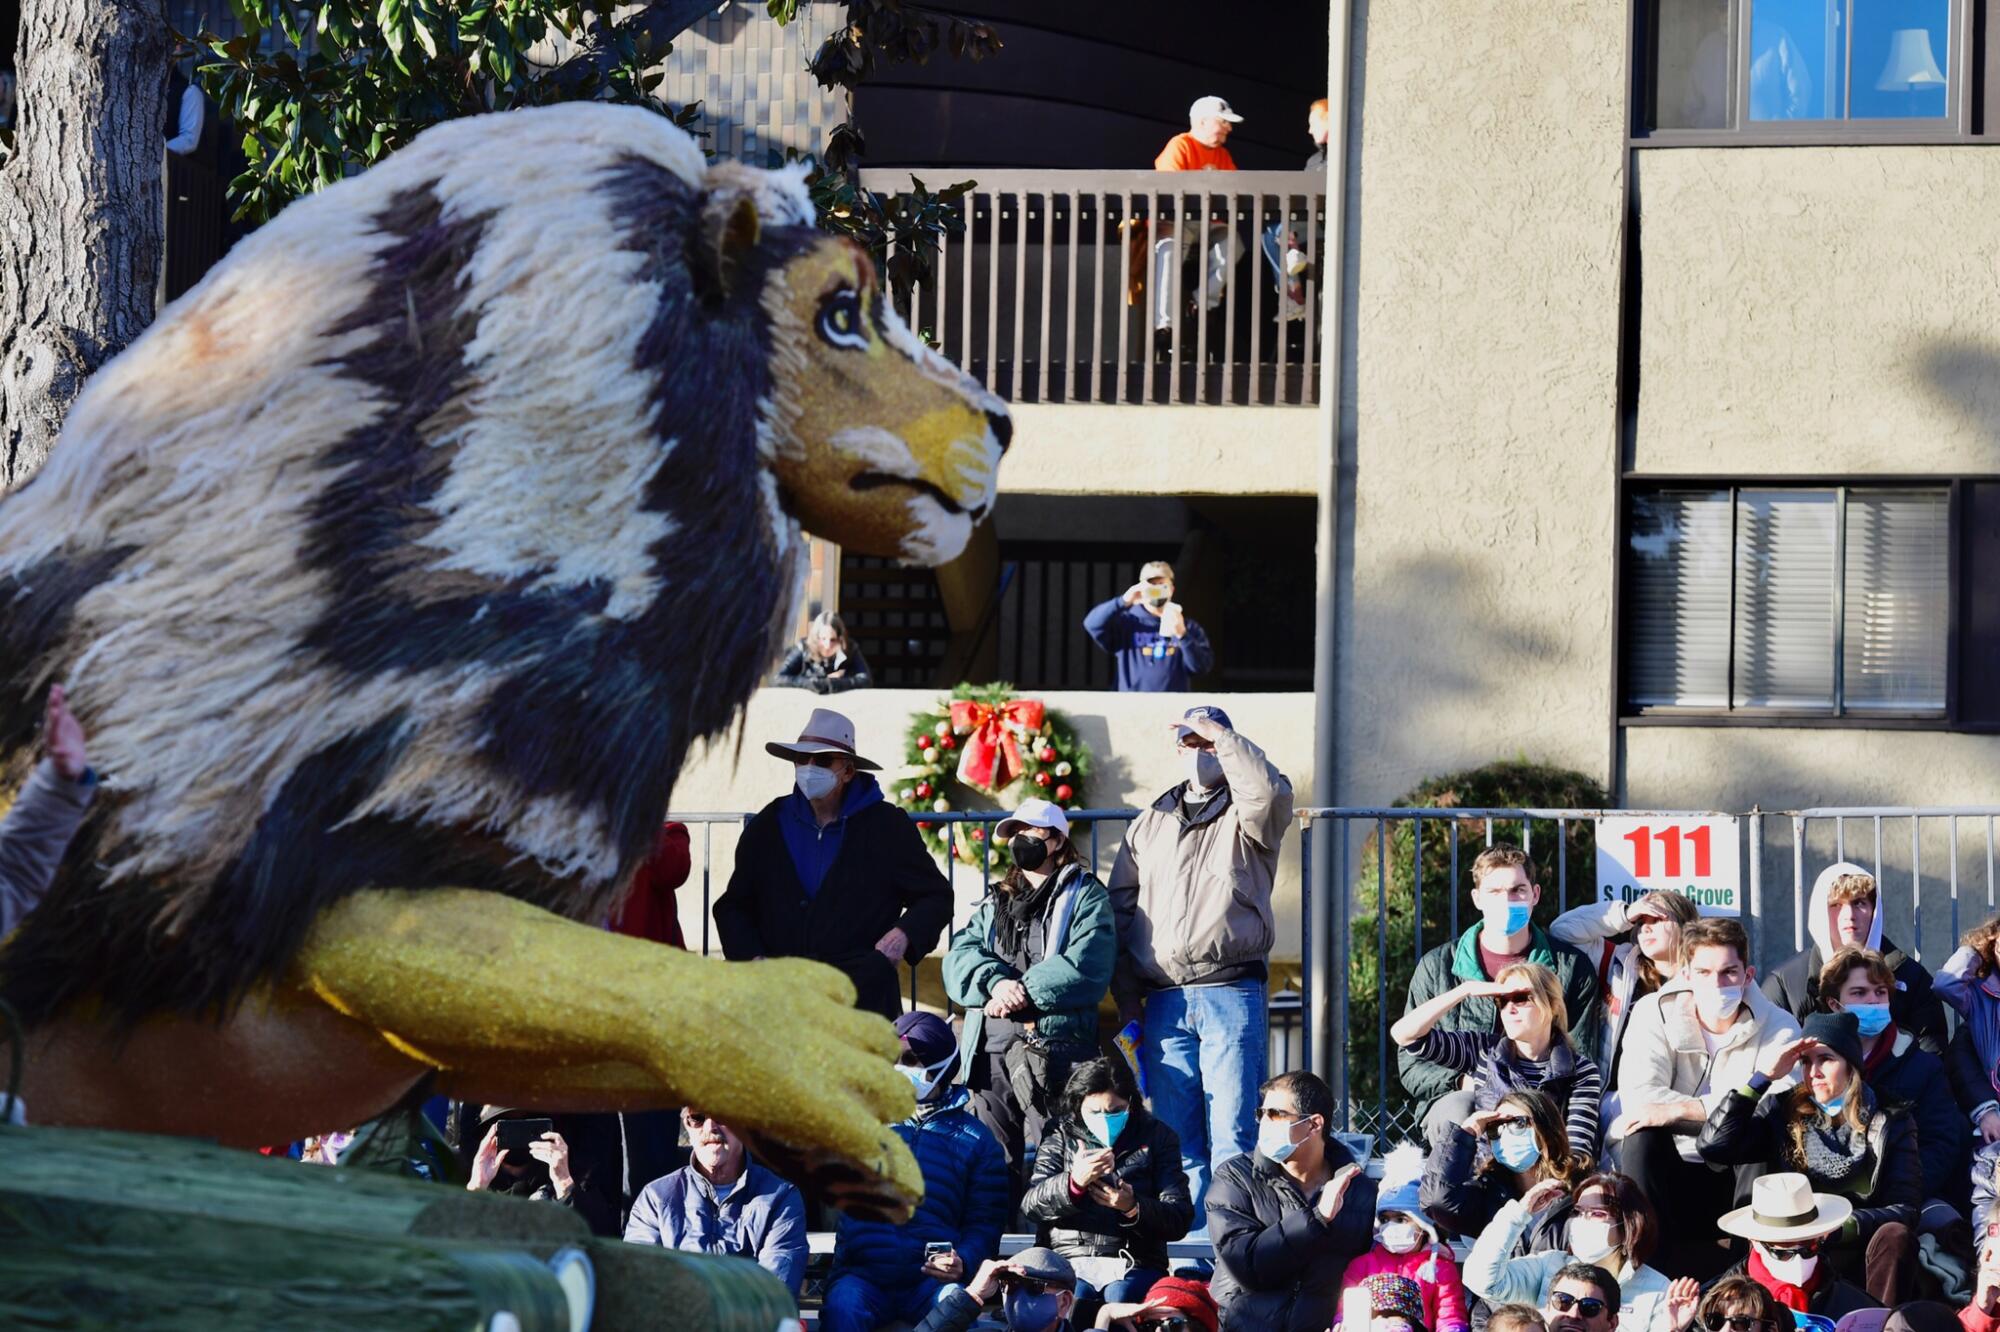 People on the sideline get a close-up view of a lion decoration on a float